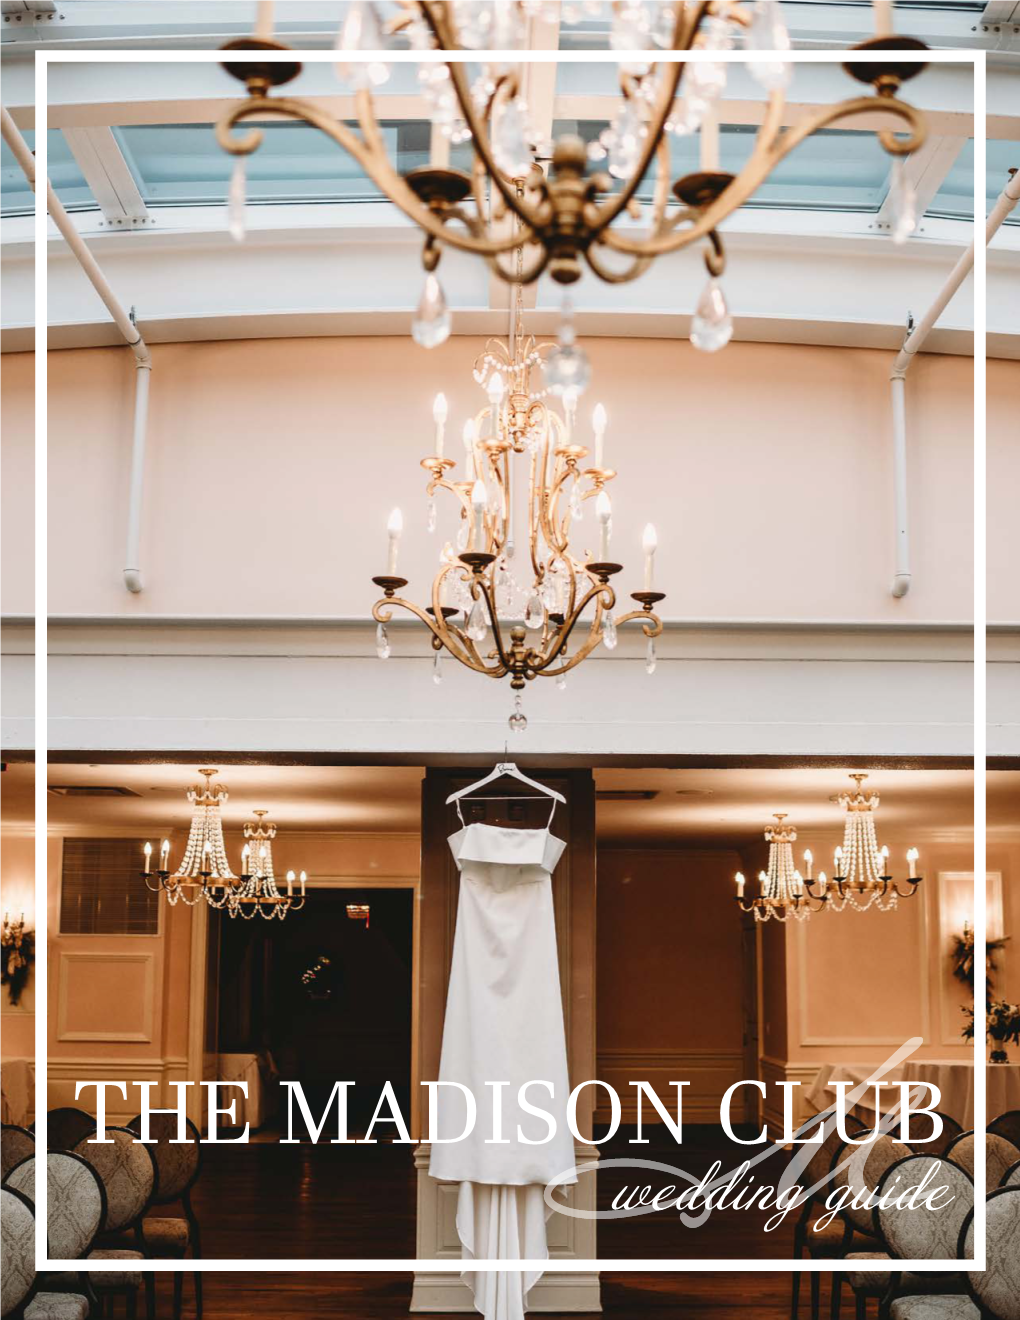 The Madison Club Has Cultivated a Culture of Community, Professionalism and Excellence